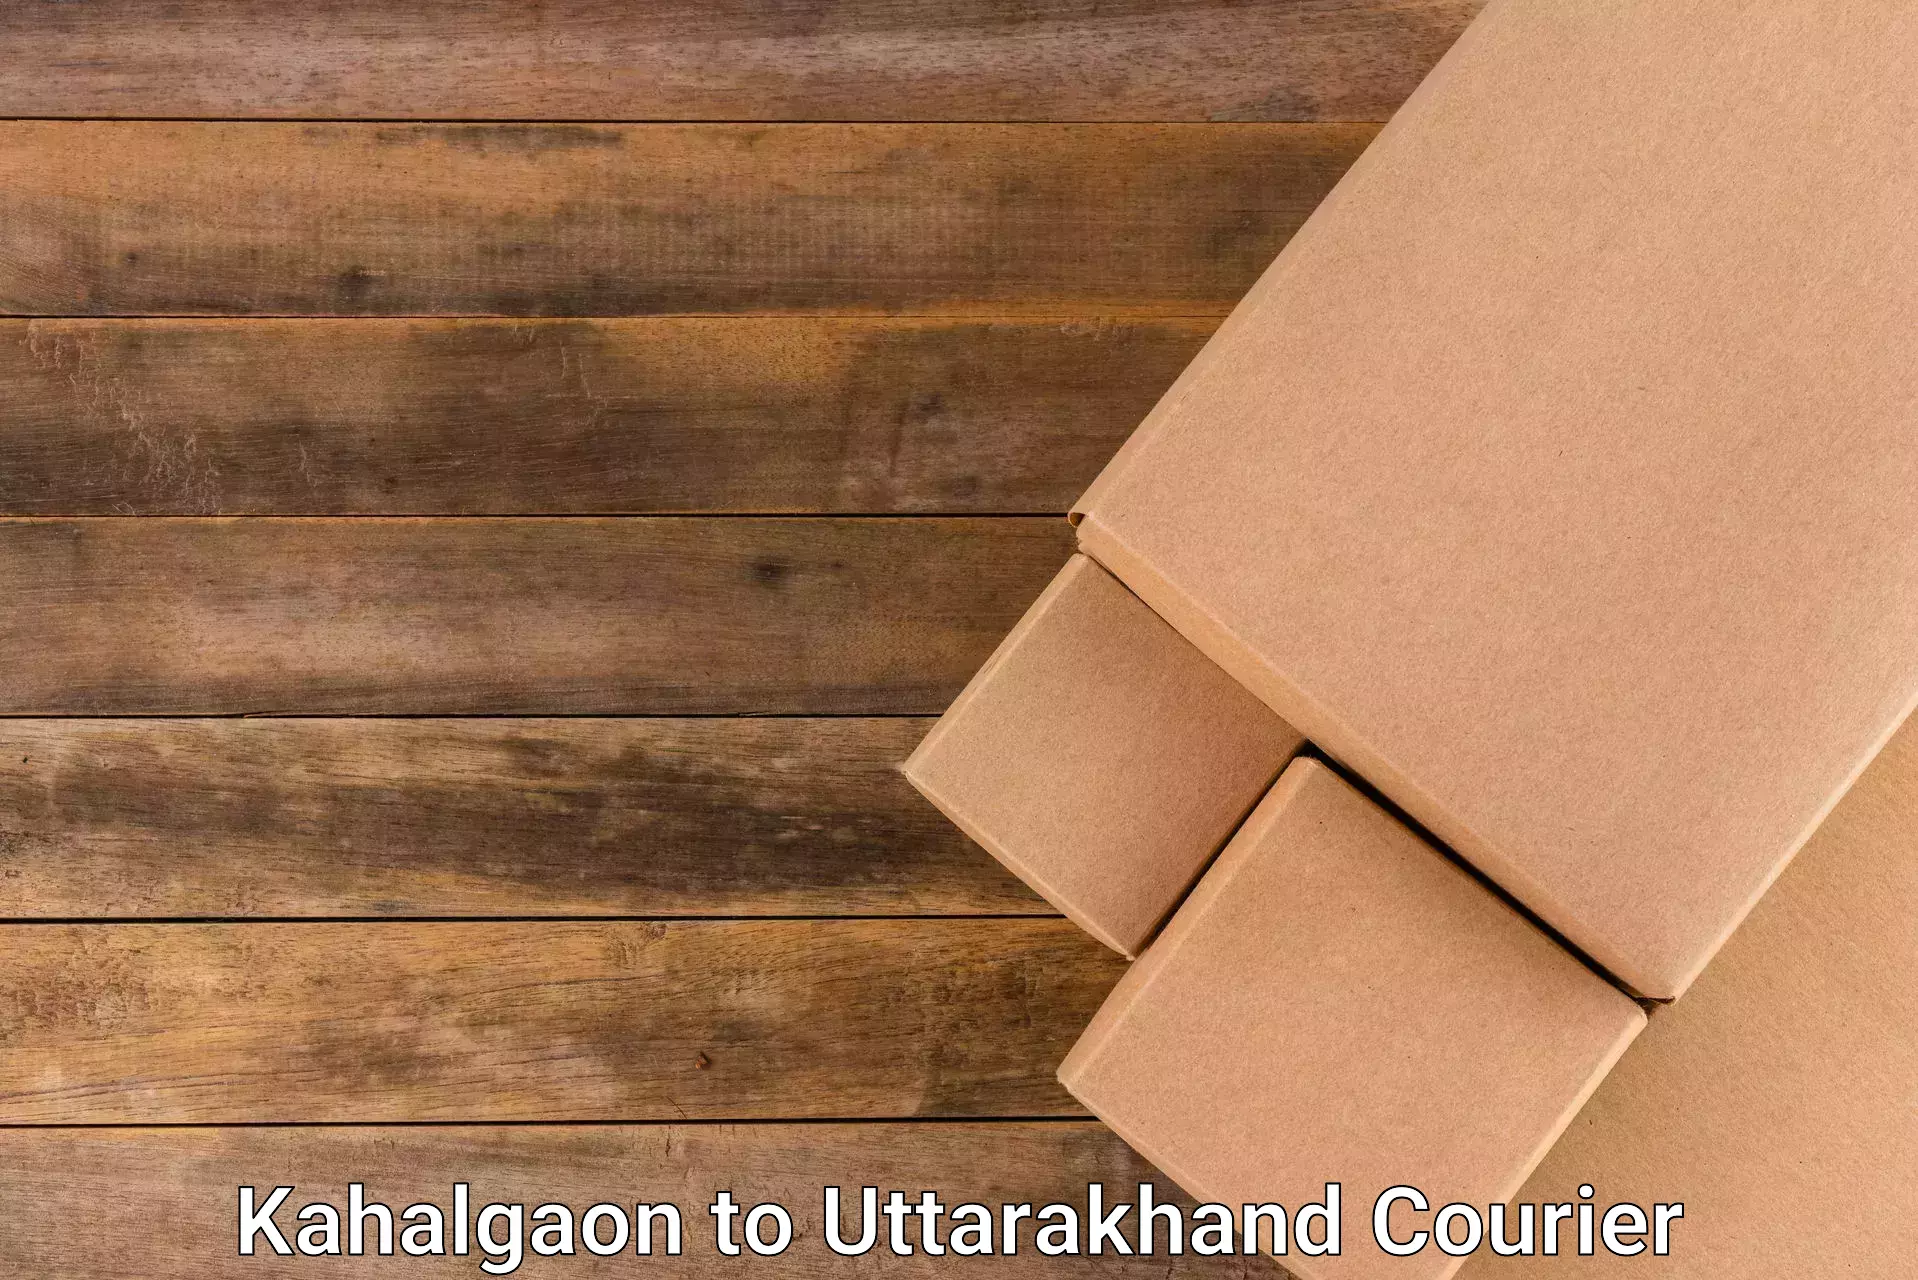 Express delivery capabilities Kahalgaon to Rudrapur